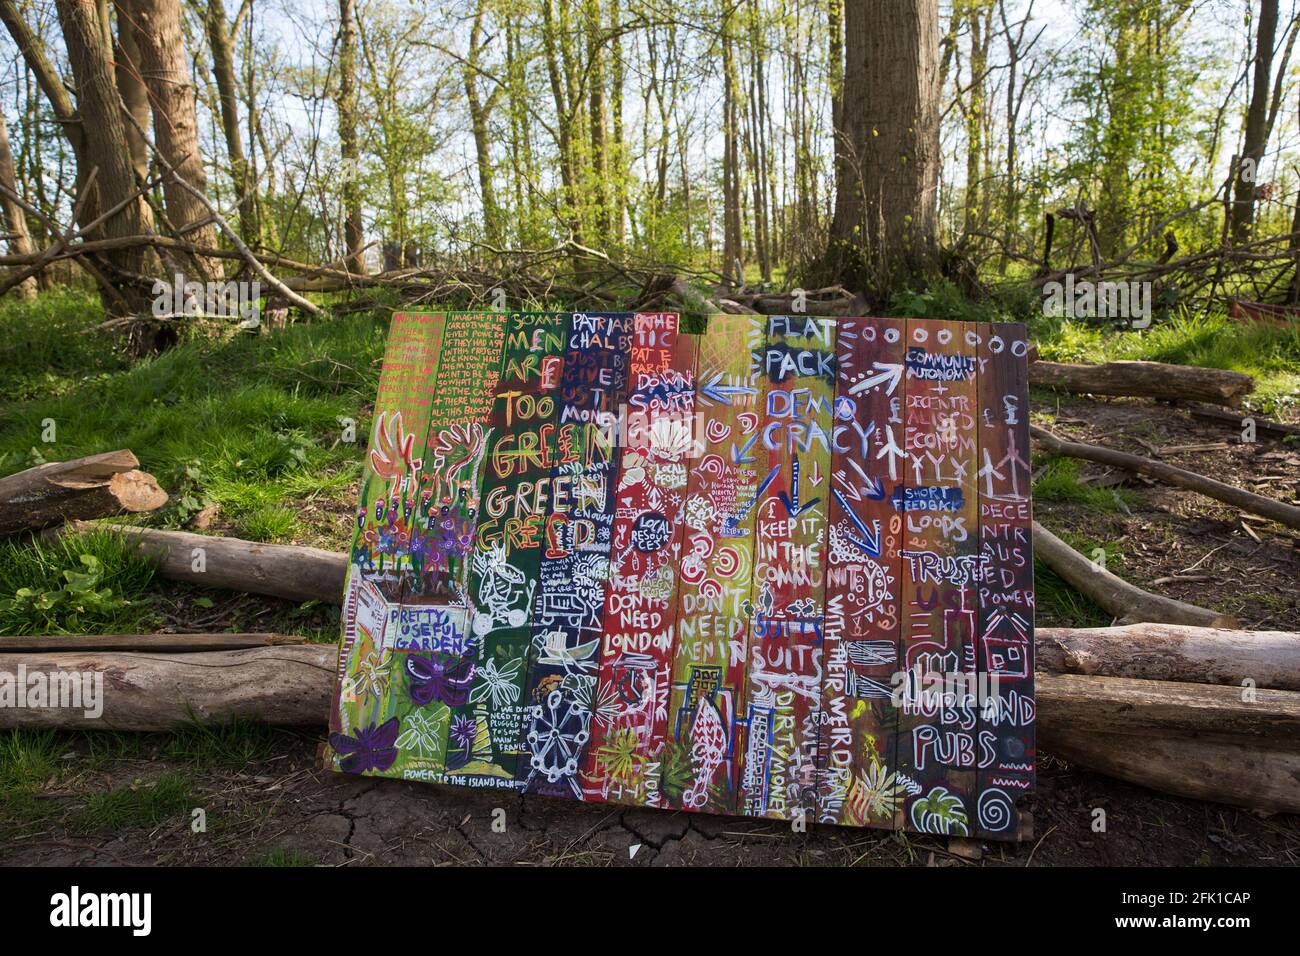 Steeple Claydon, UK. 26th April, 2021. Artwork is pictured in front of surviving woodland at Poors Piece. A strip of the woodland was removed by HS2 Ltd in February 2021. Poors Piece Protection Camp, set up in spring 2020 at the invitation of owner Clive Higgins, is one of several protest camps occupied by environmental activists in order to oppose the HS2 infrastructure project along its Phase 1 route between London and Birmingham. Credit: Mark Kerrison/Alamy Live News Stock Photo